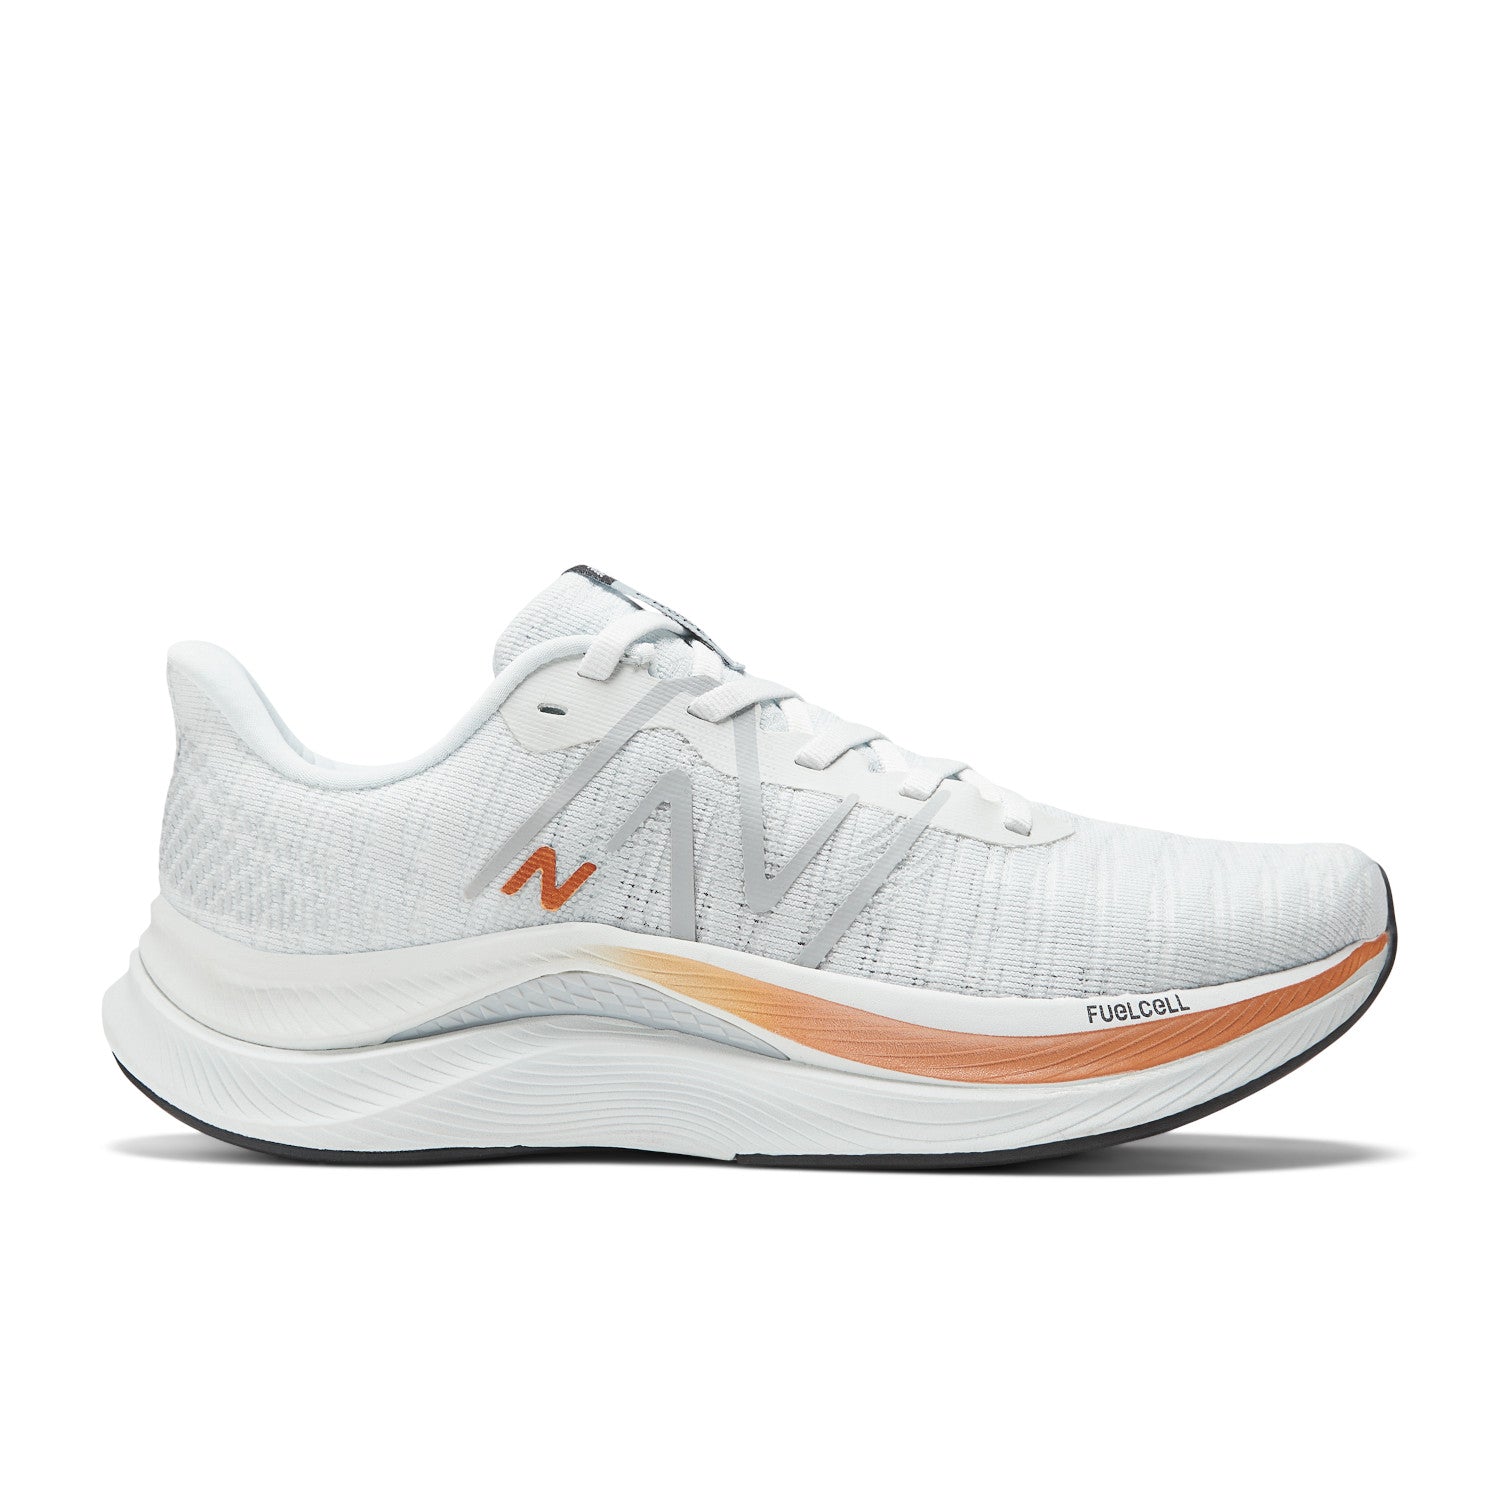 New Balance FuelCell Propel v4 WFCPRGB4  Women's12